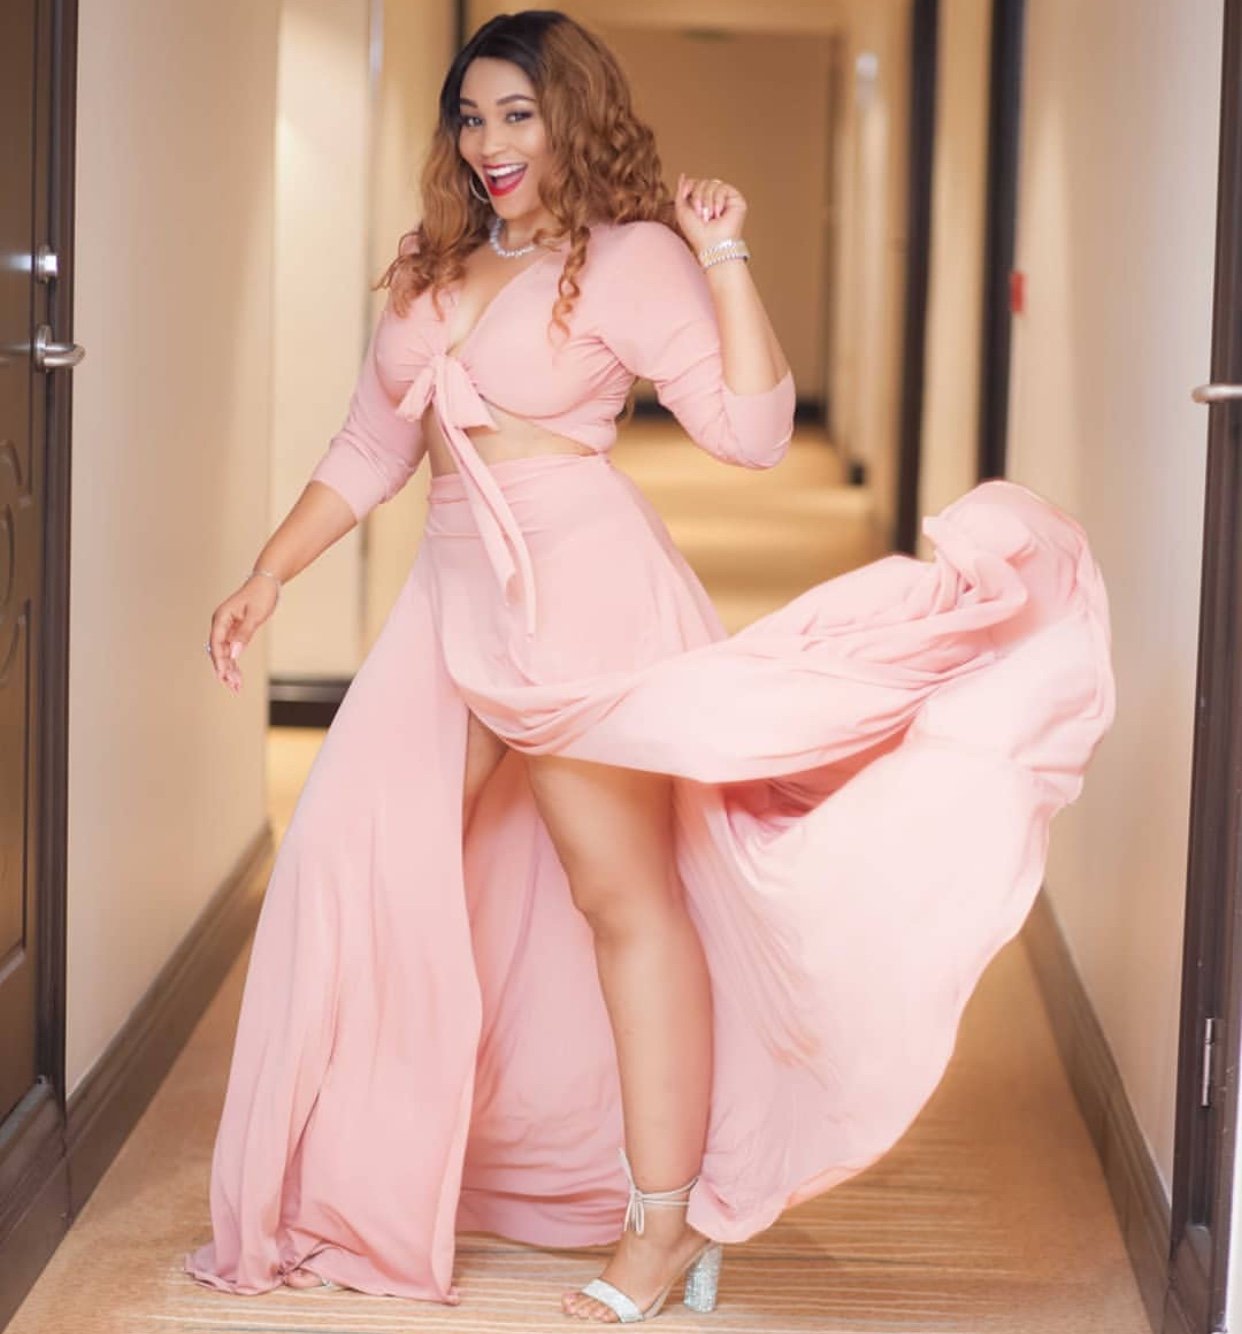 Zari’s new man treating her like a queen, check out his latest gift to the boss lady!